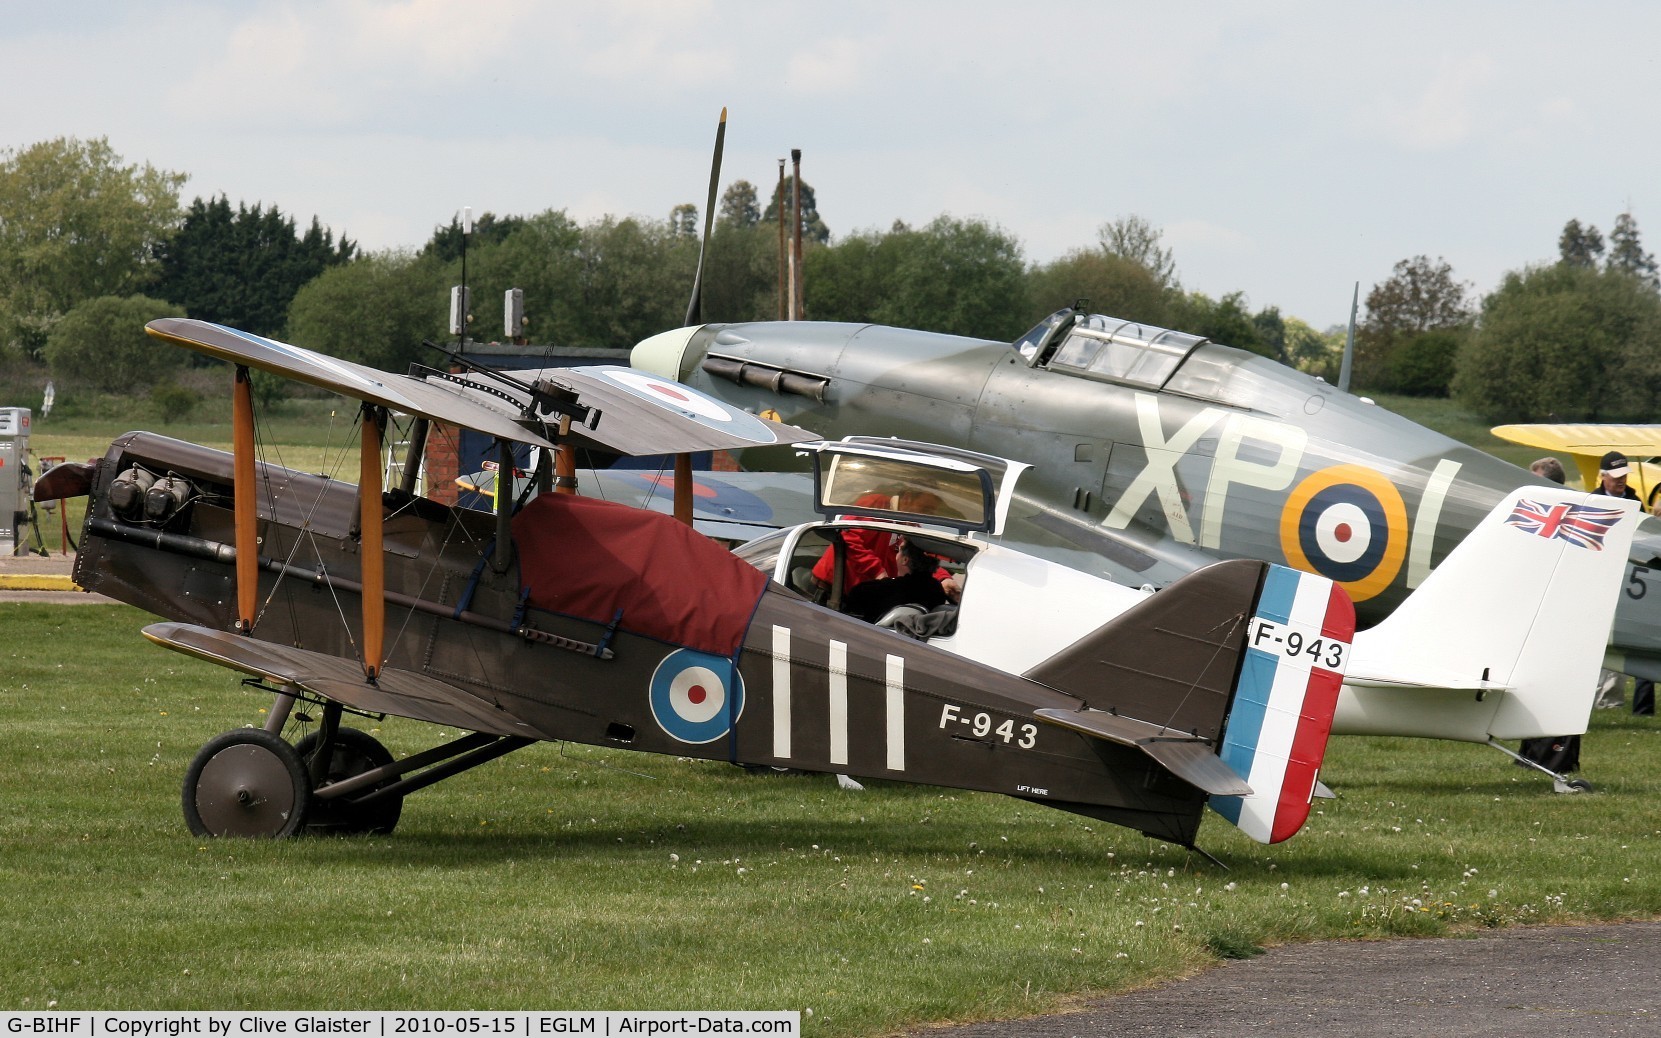 G-BIHF, 1983 Royal Aircraft Factory SE-5A Replica C/N PFA 020-10548, In the colours of the ROYAL FLYING CORPS